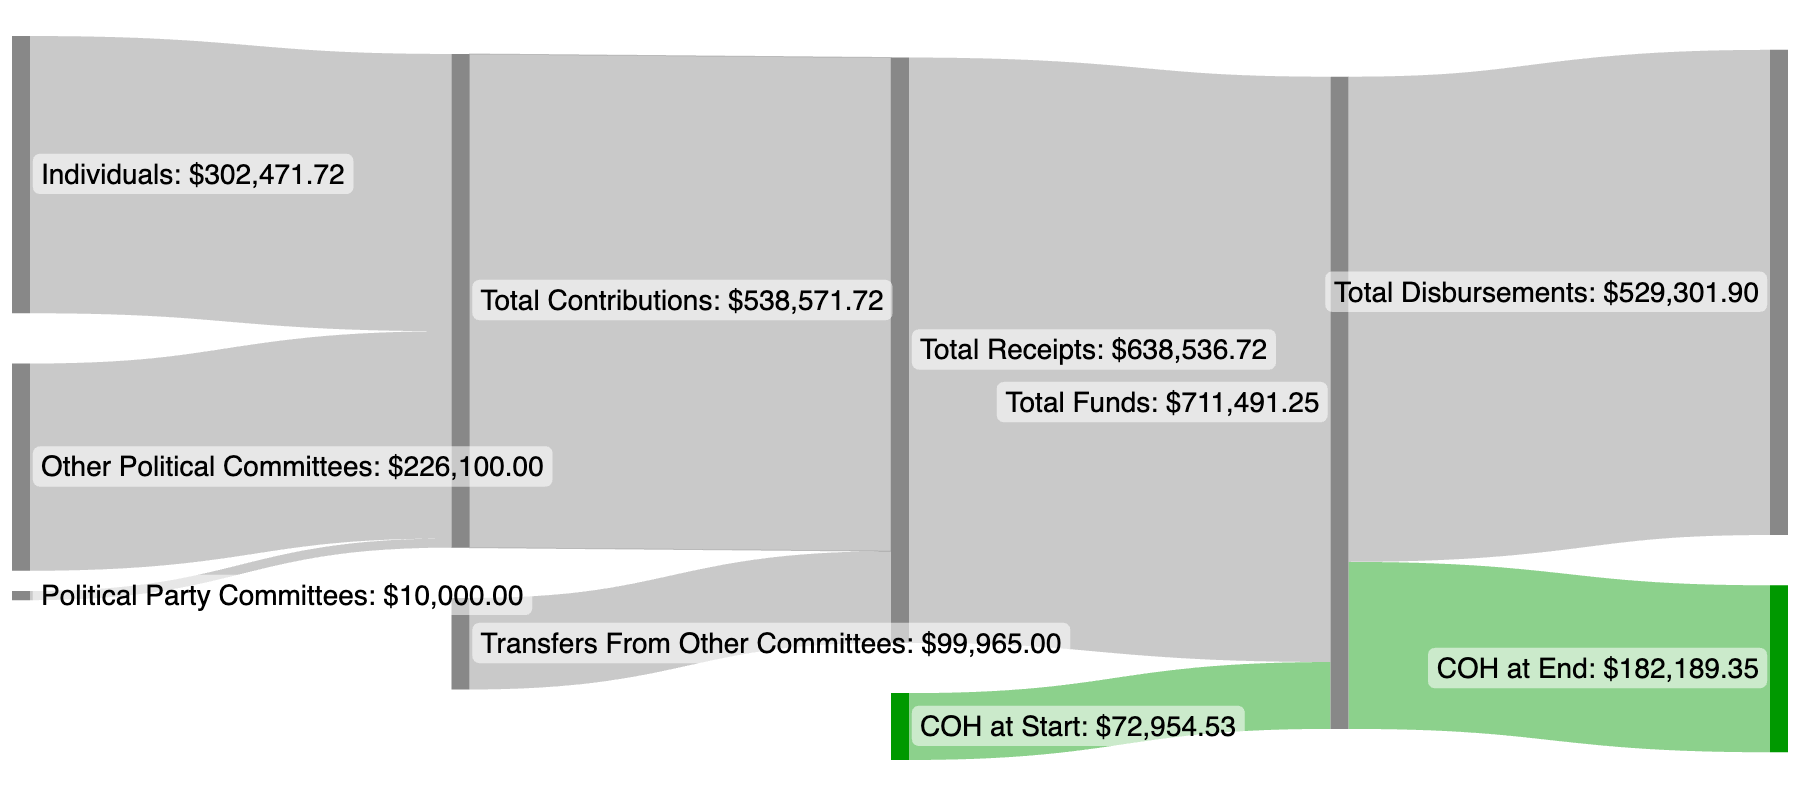 Sankey diagram detailing the major flows from an FEC Quarterly Report. It shows the breakdown of inflows for the quarter (Contributions and Transfers) and outflows (Disbursements and Cash On Hand)